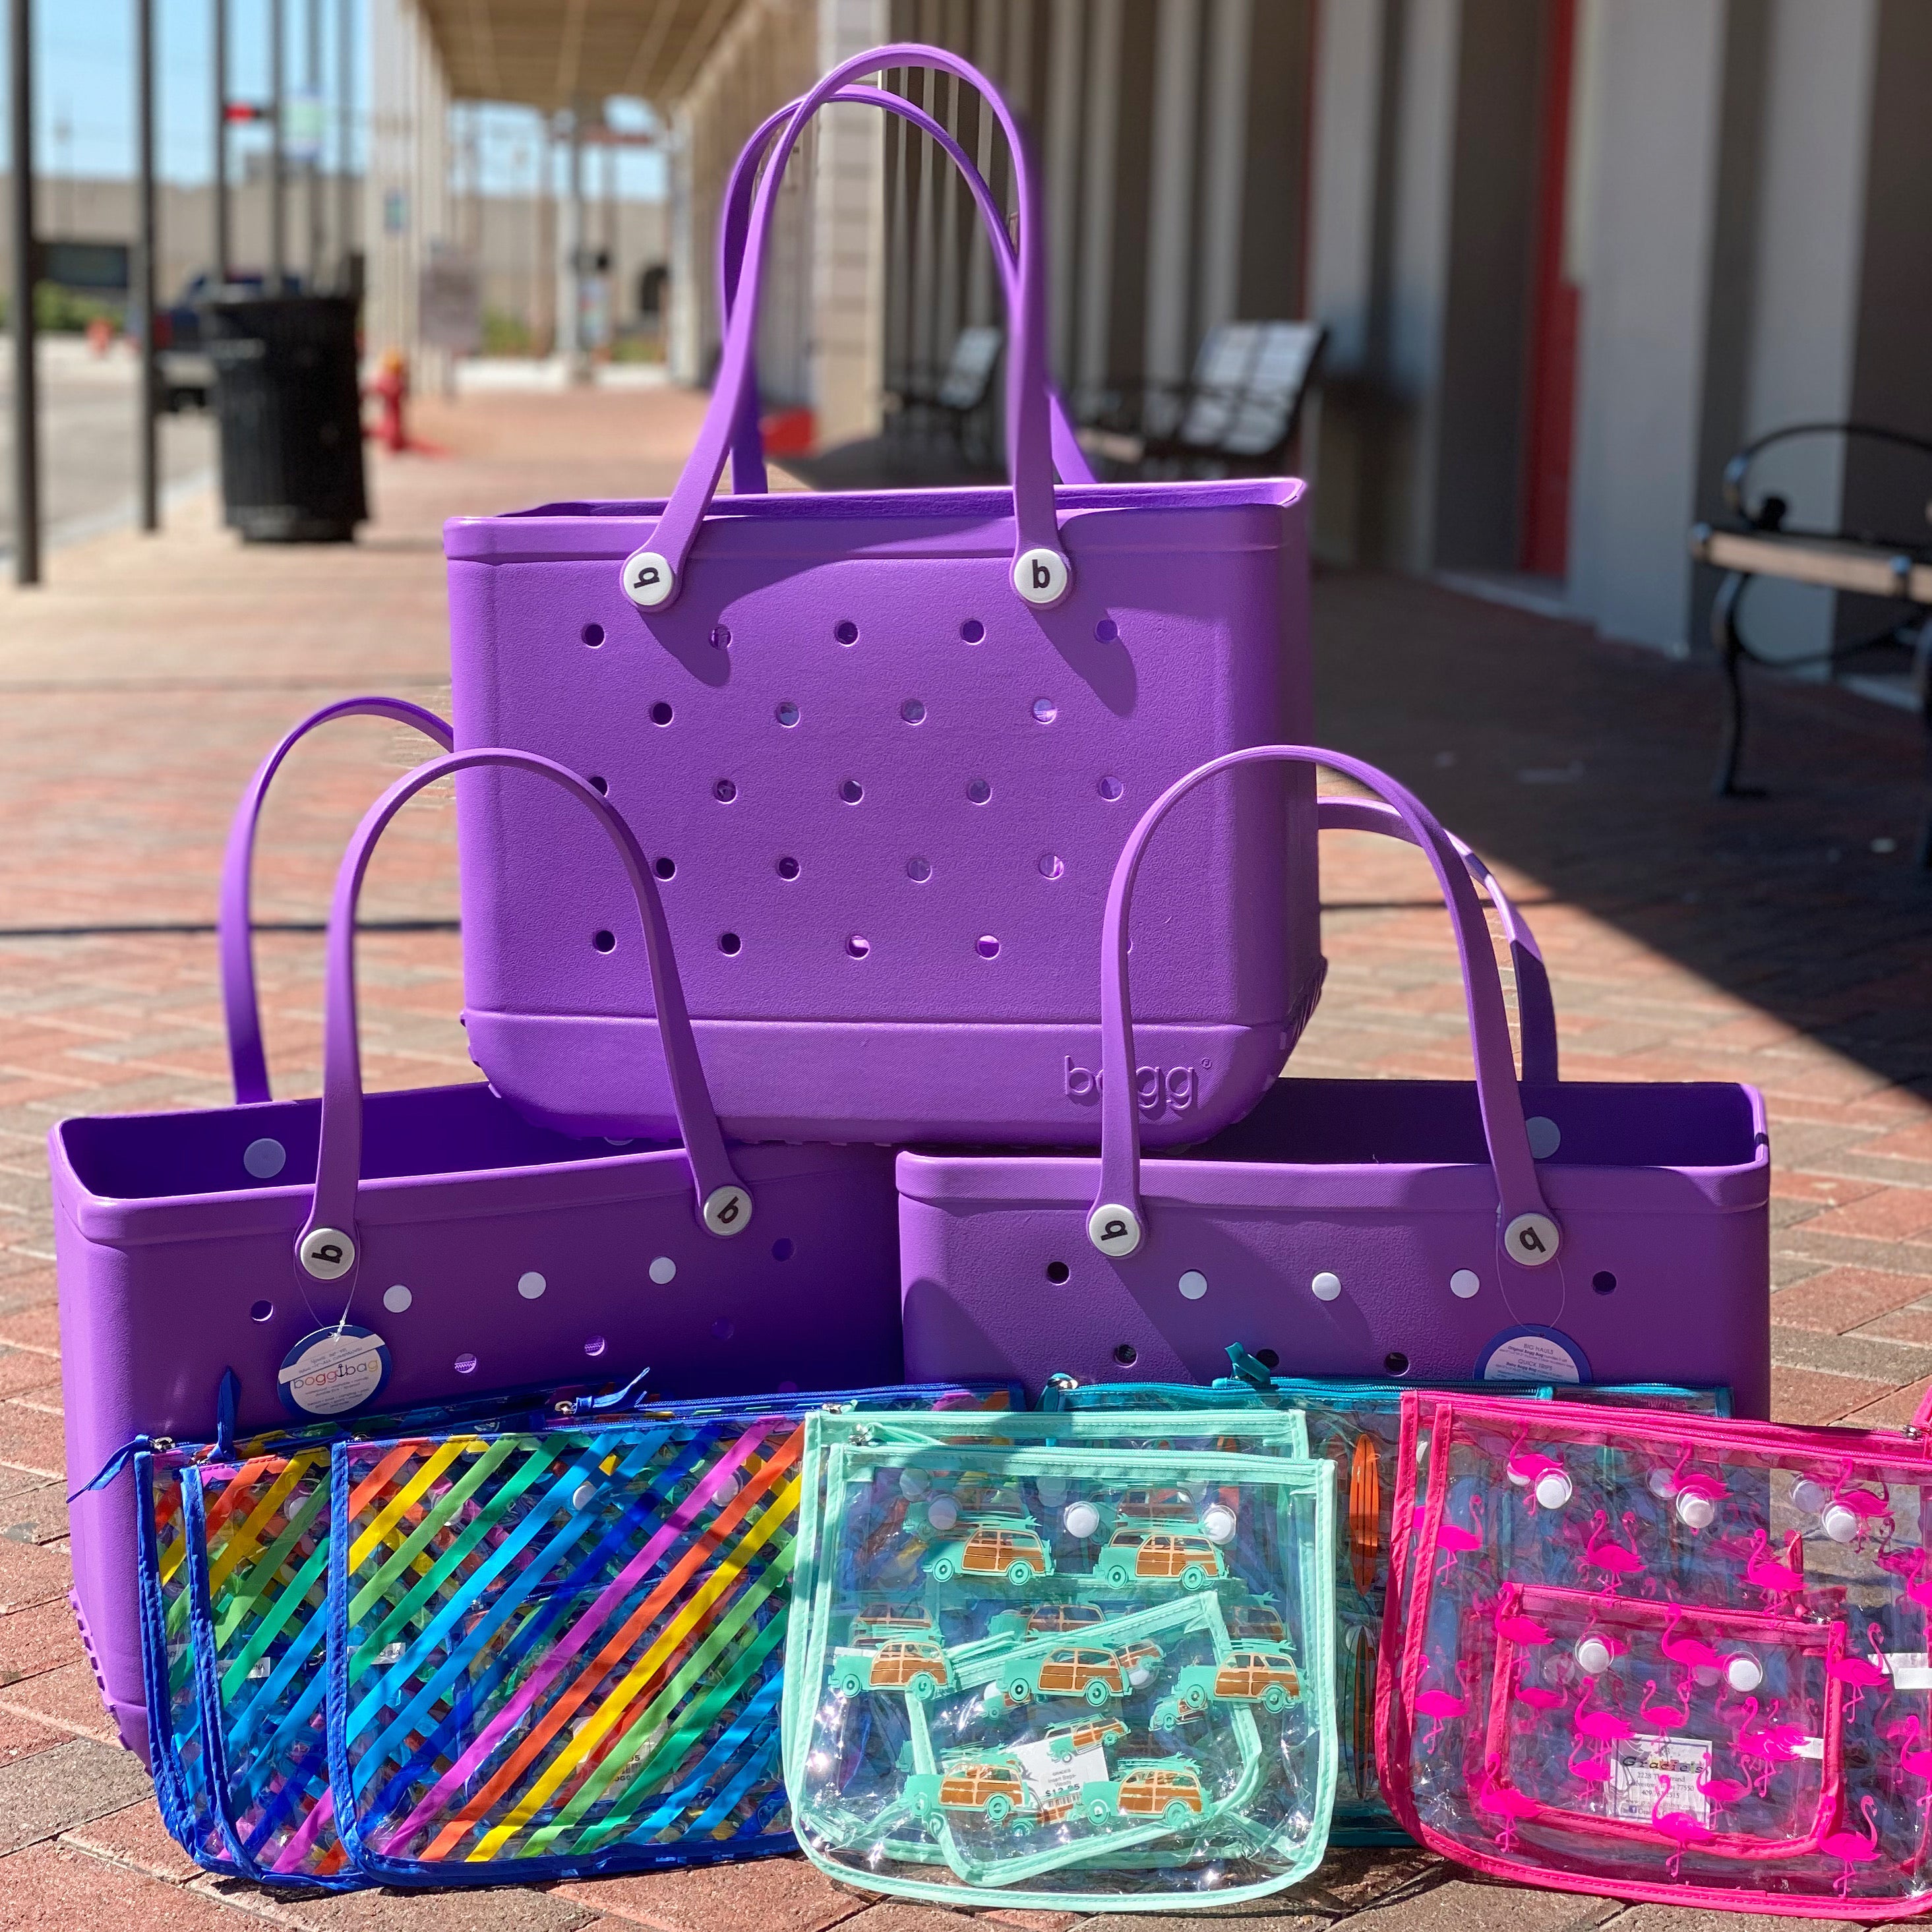 🤩 JUST ARRIVED 🤩 We've got some FRESH and NEW Bogg Bag colors for you to  love including Navy (restock,) Bubblegum, Seafoam, Raspberry, and  Periwinkle!, By Palmetto Moon